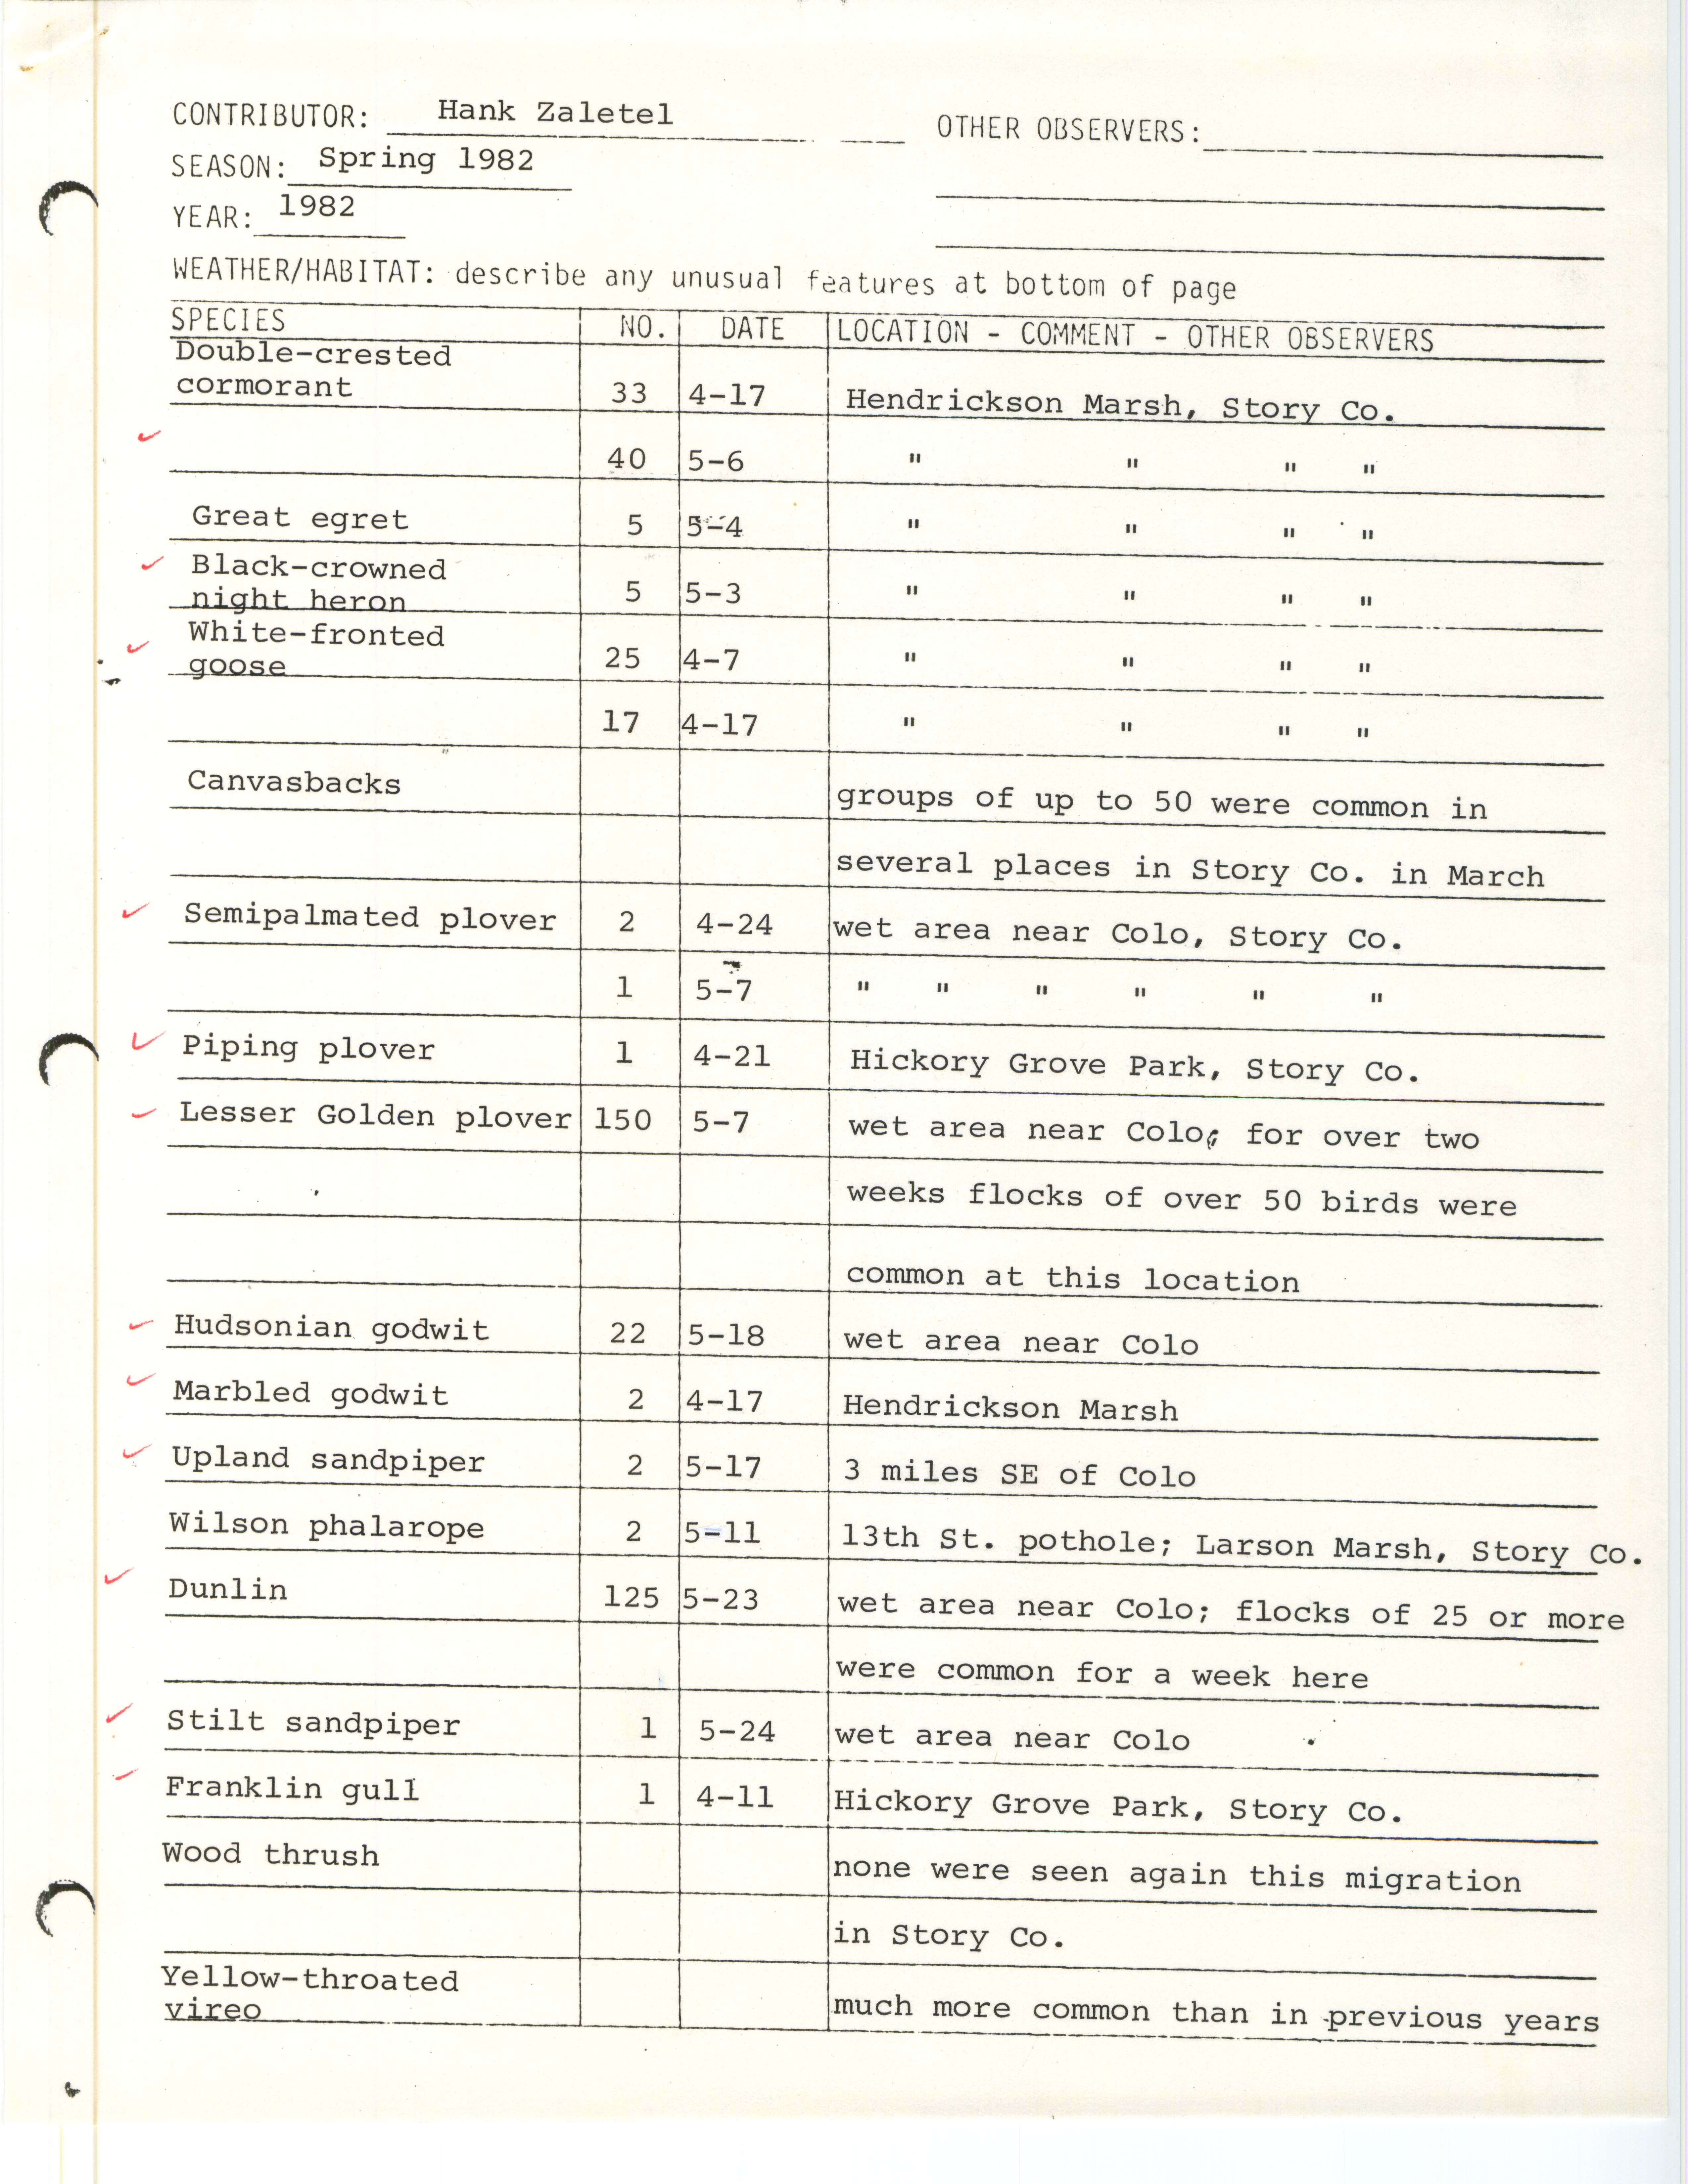 Field notes contributed by Hank Zaletel, spring 1982